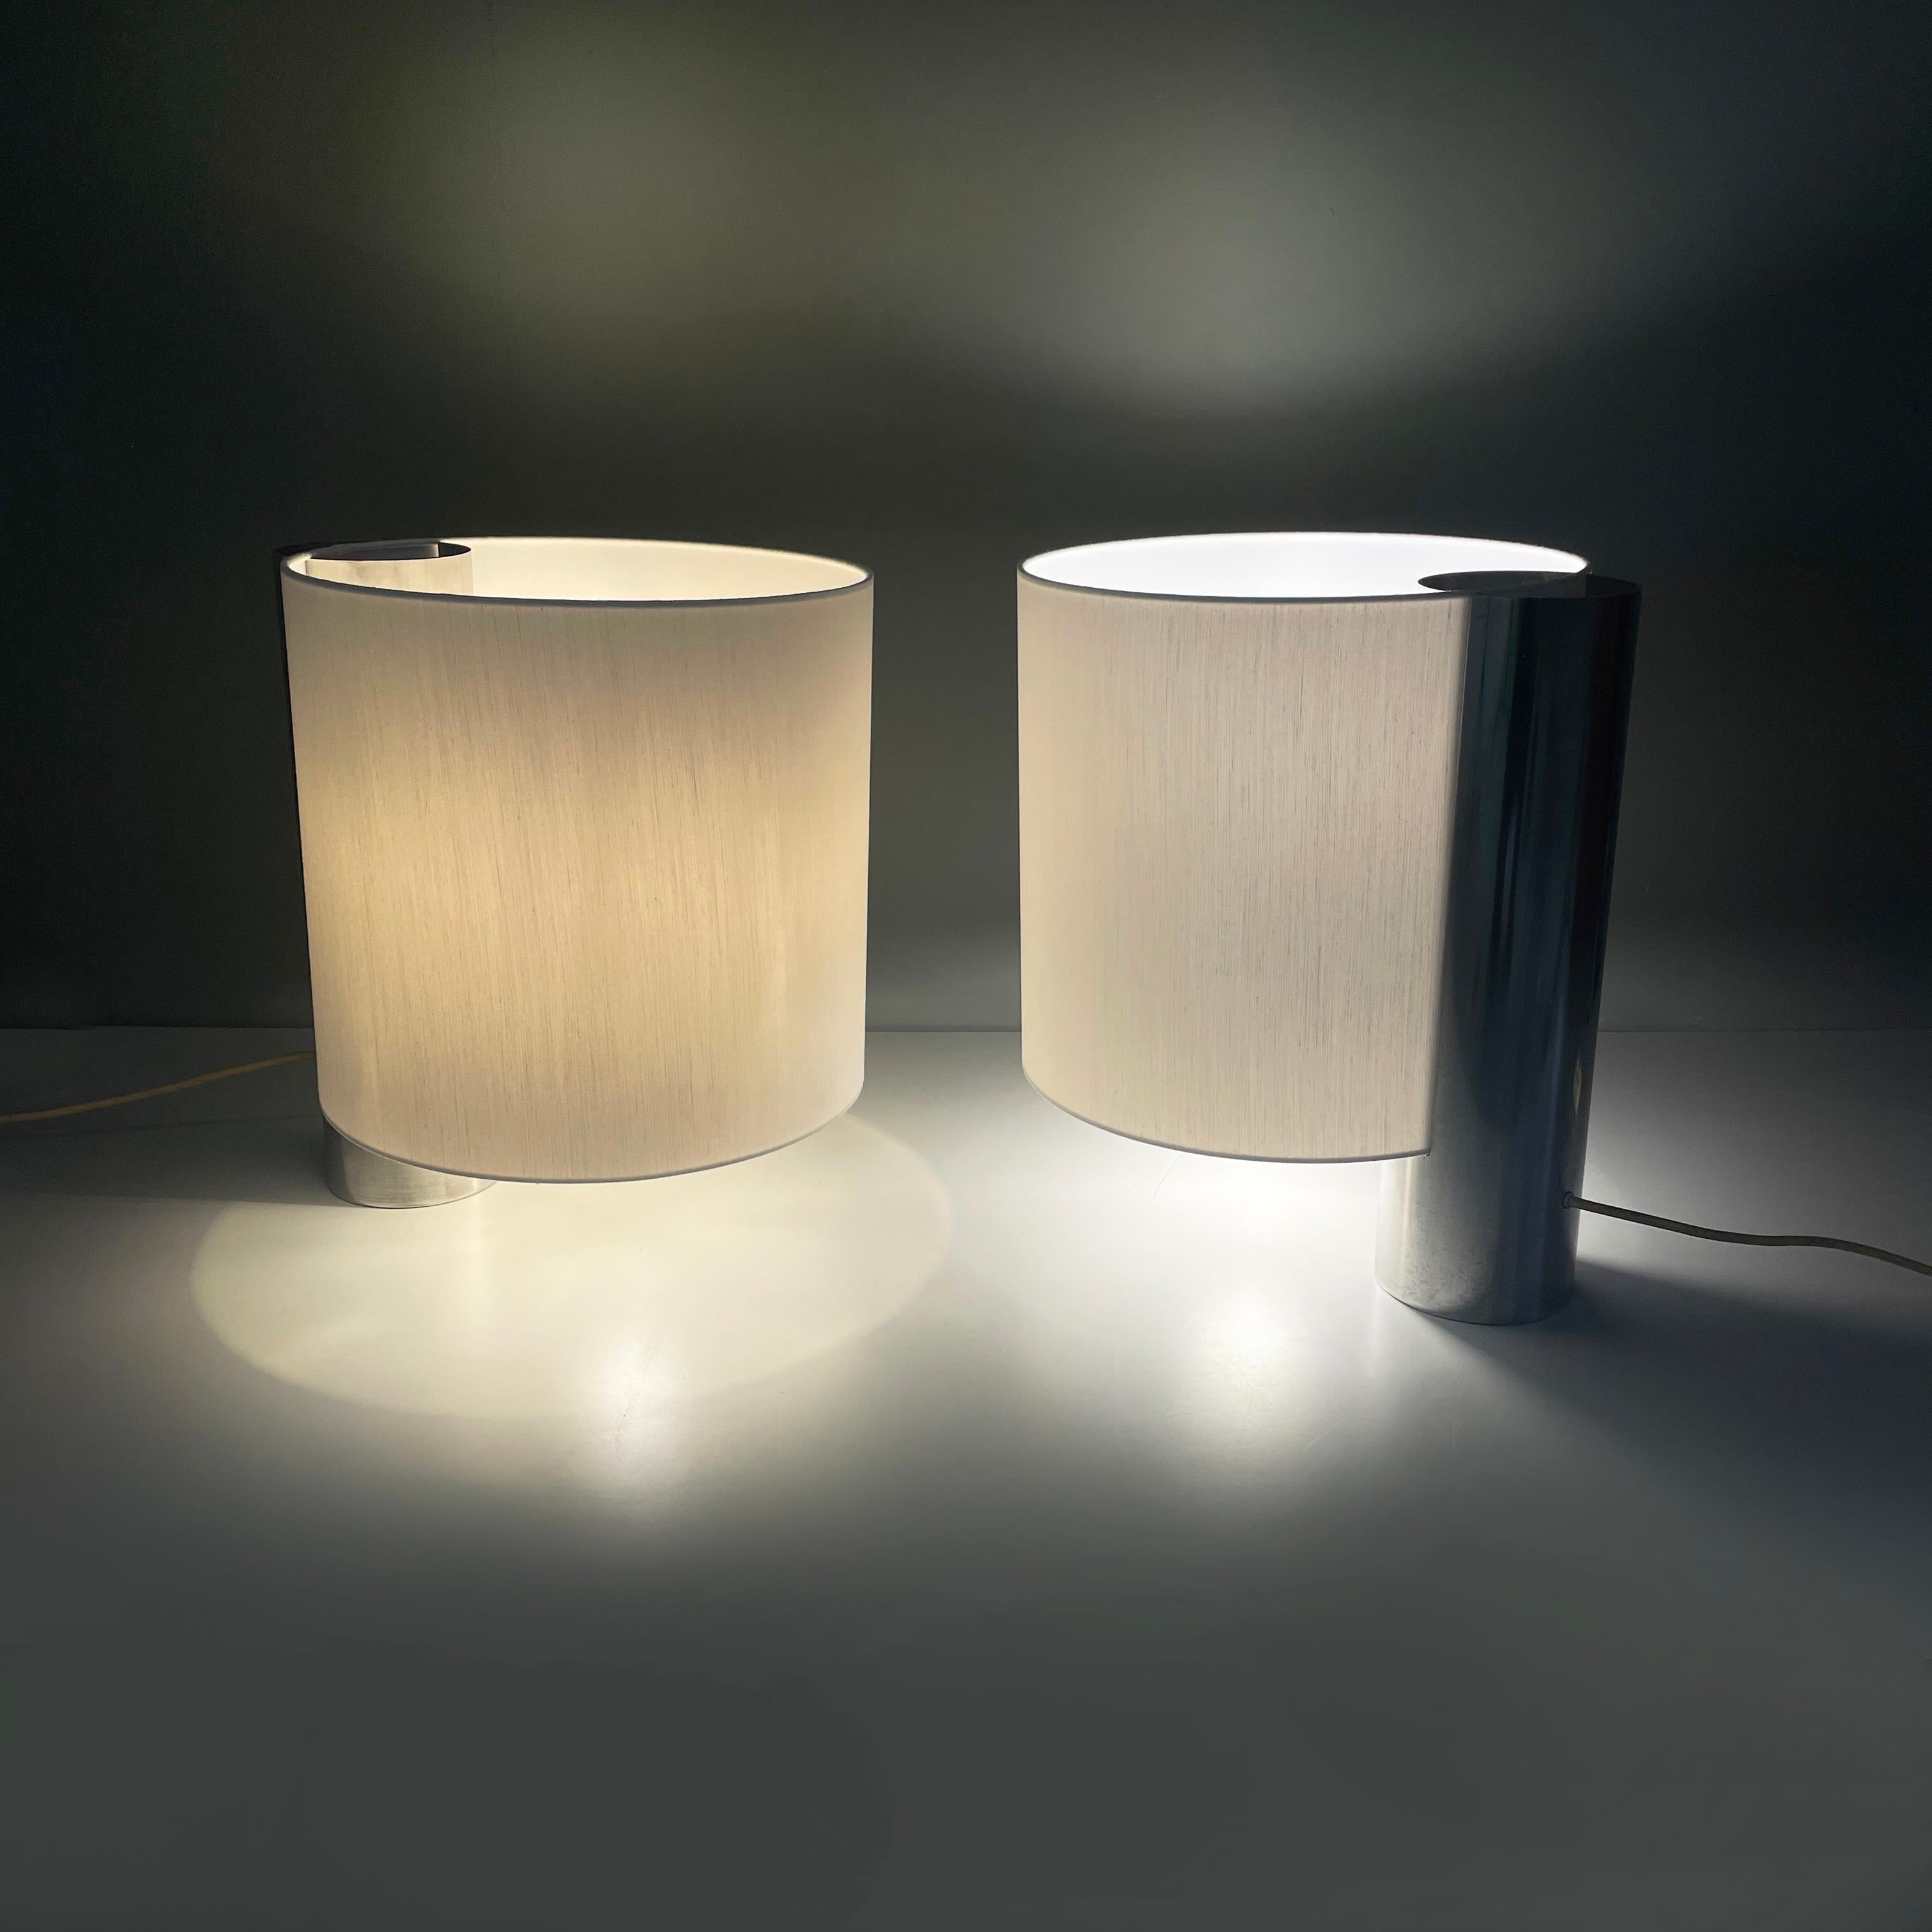 Italian modern Table lamps Fluette by Giuliana Gramigna for Quattrifolio, 1970s
Pair of table lamps mod. Fluette with double bulb and cylindrical lampshade in white fabric. The cylindrical metal structure is positioned along the profile. It has a